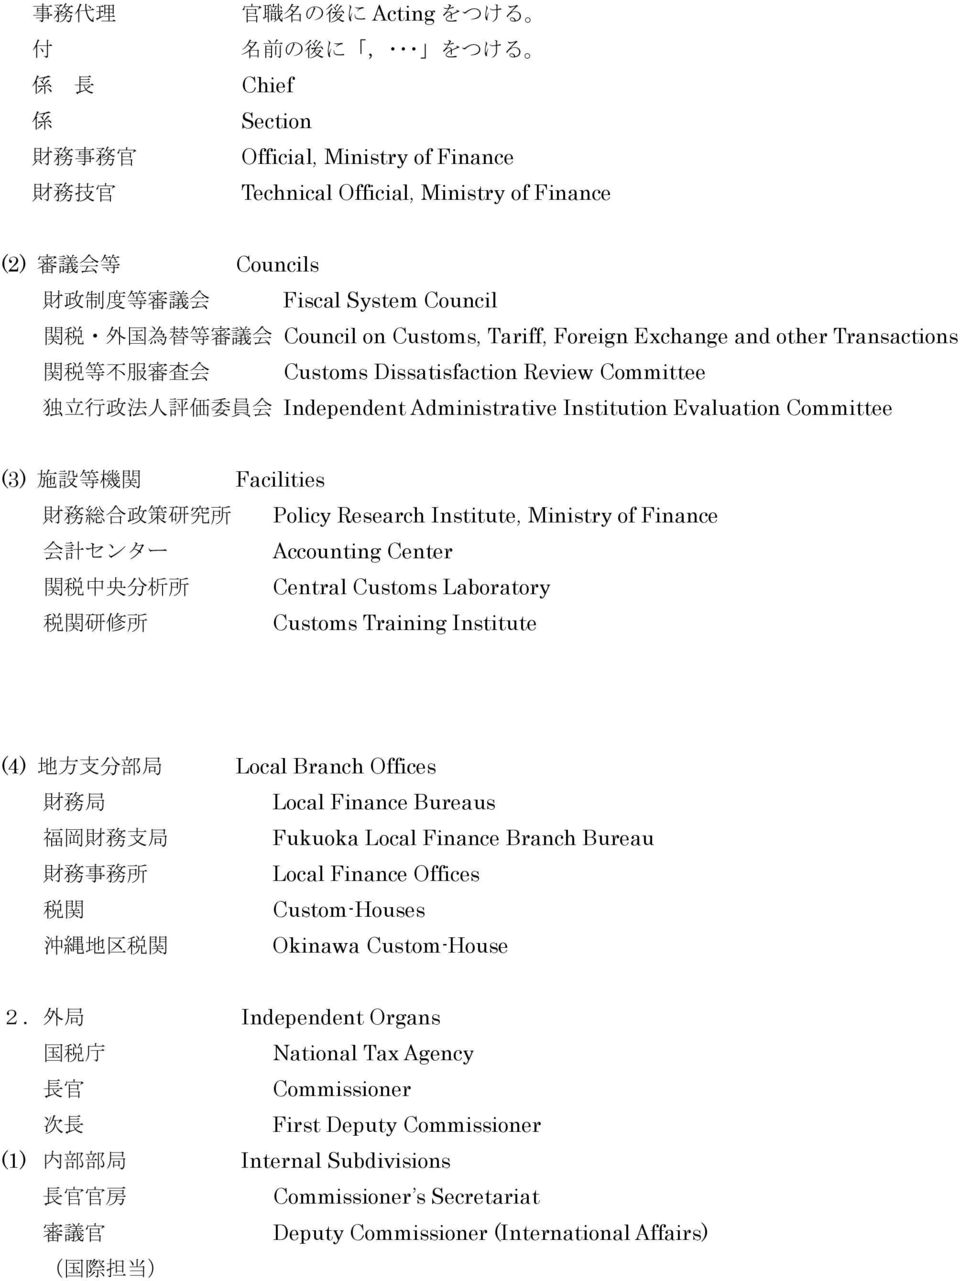 Independent Administrative Institution Evaluation Committee (3) 施 設 等 機 関 Facilities 財 務 総 合 政 策 研 究 所 Policy Research Institute, Ministry of Finance 会 計 センター Accounting Center 関 税 中 央 分 析 所 Central